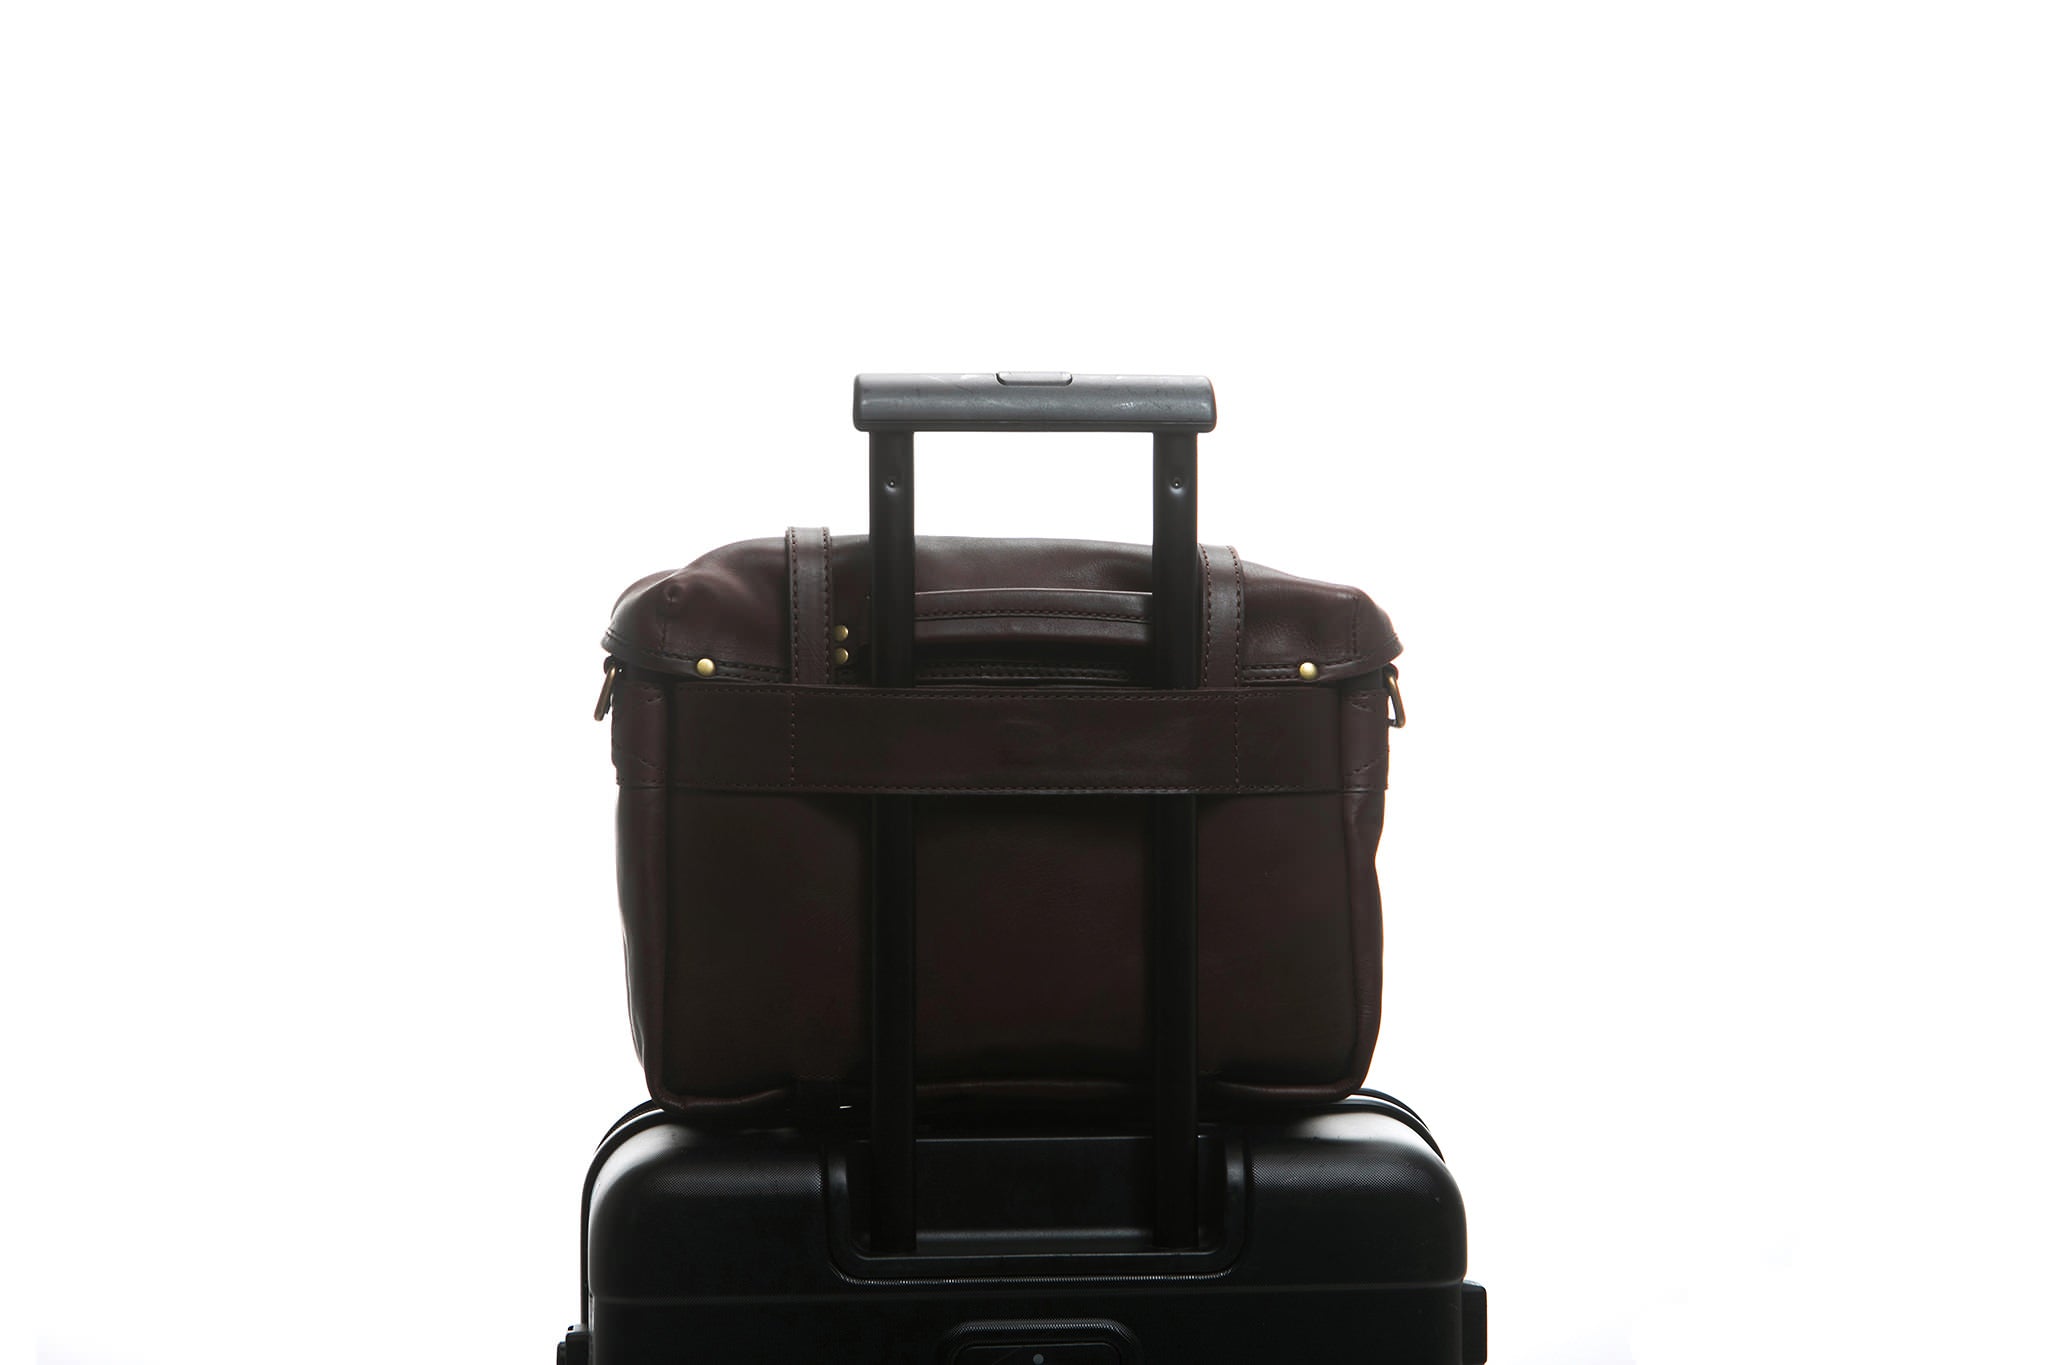 Traveling made easy with a Cravar bag. Shown here with an all leather F.C. bag.